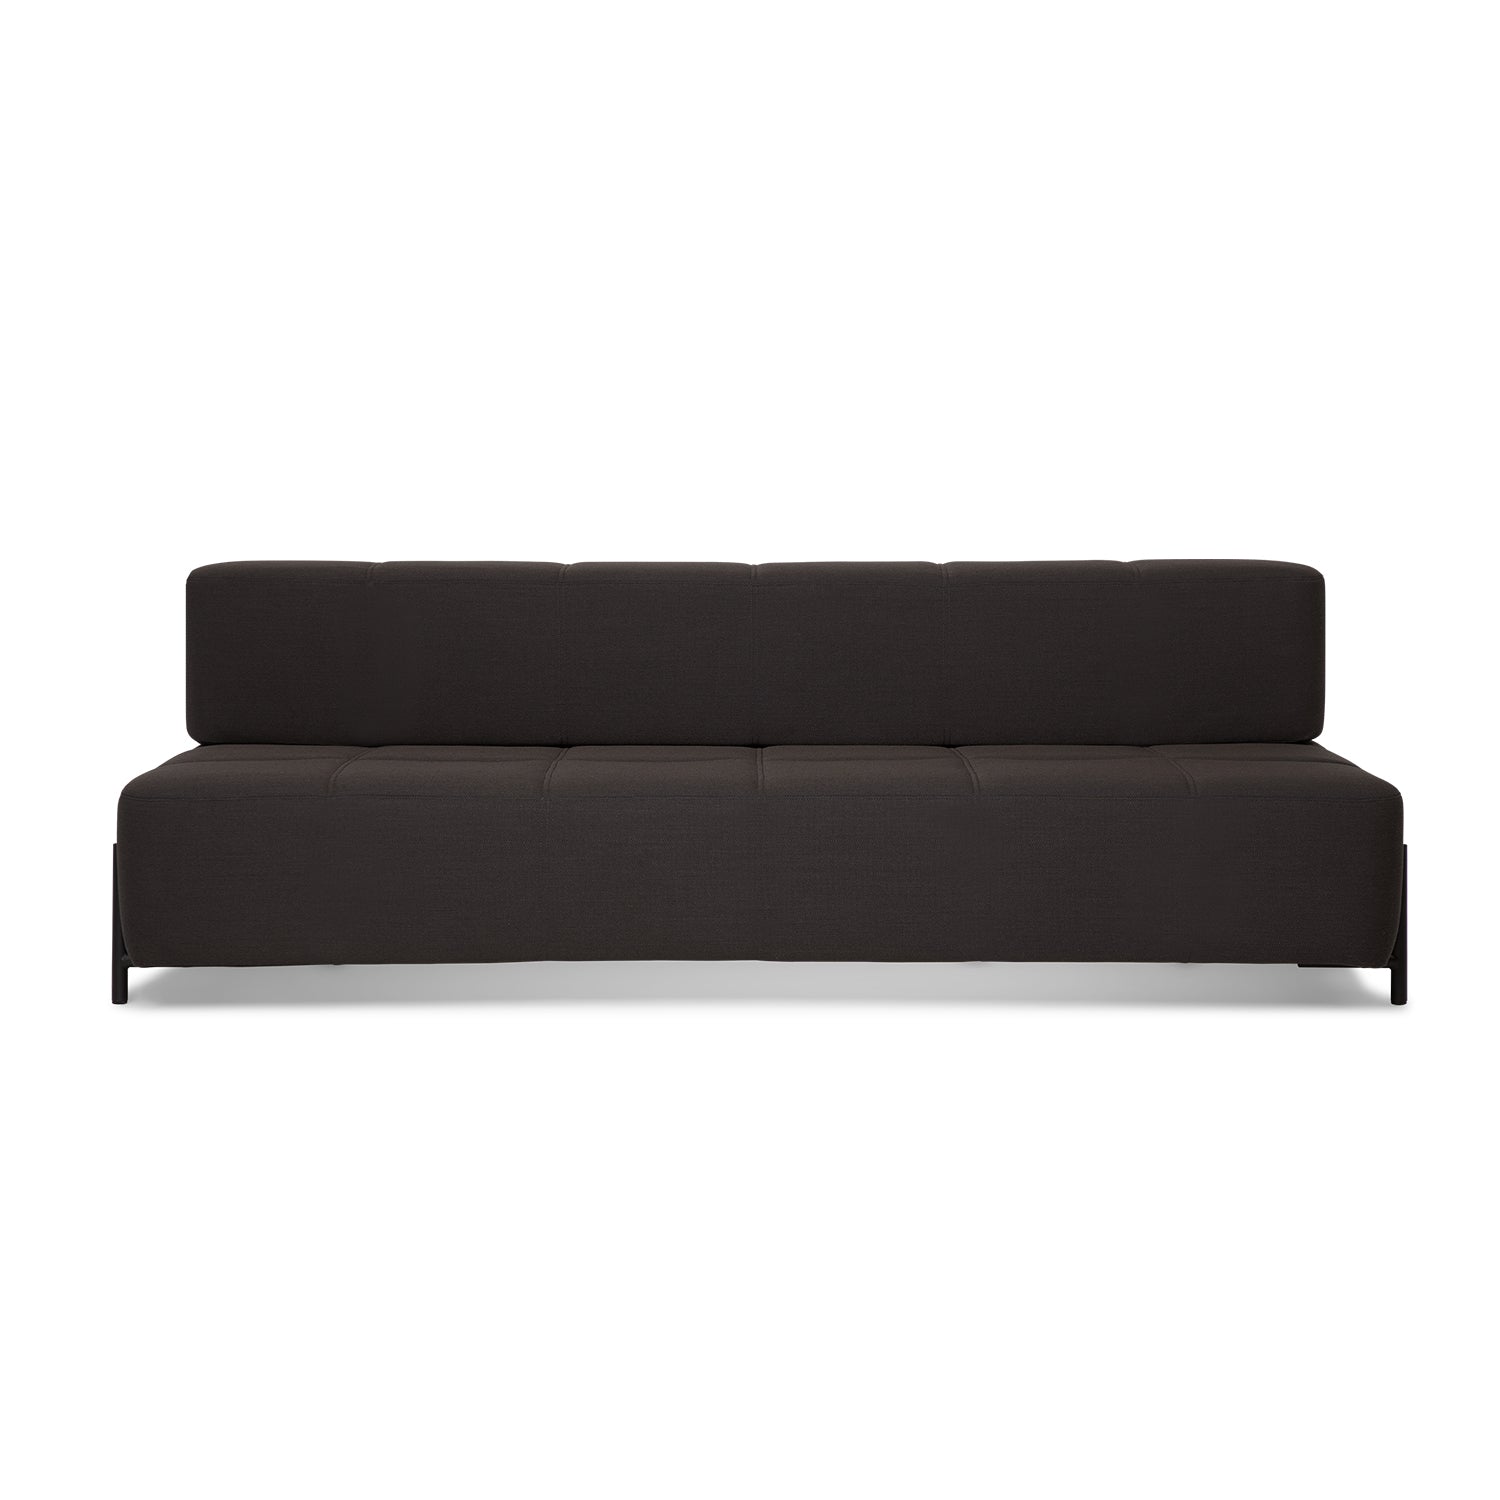 Northern Daybe Sofabed without Armrest in Dark Grey